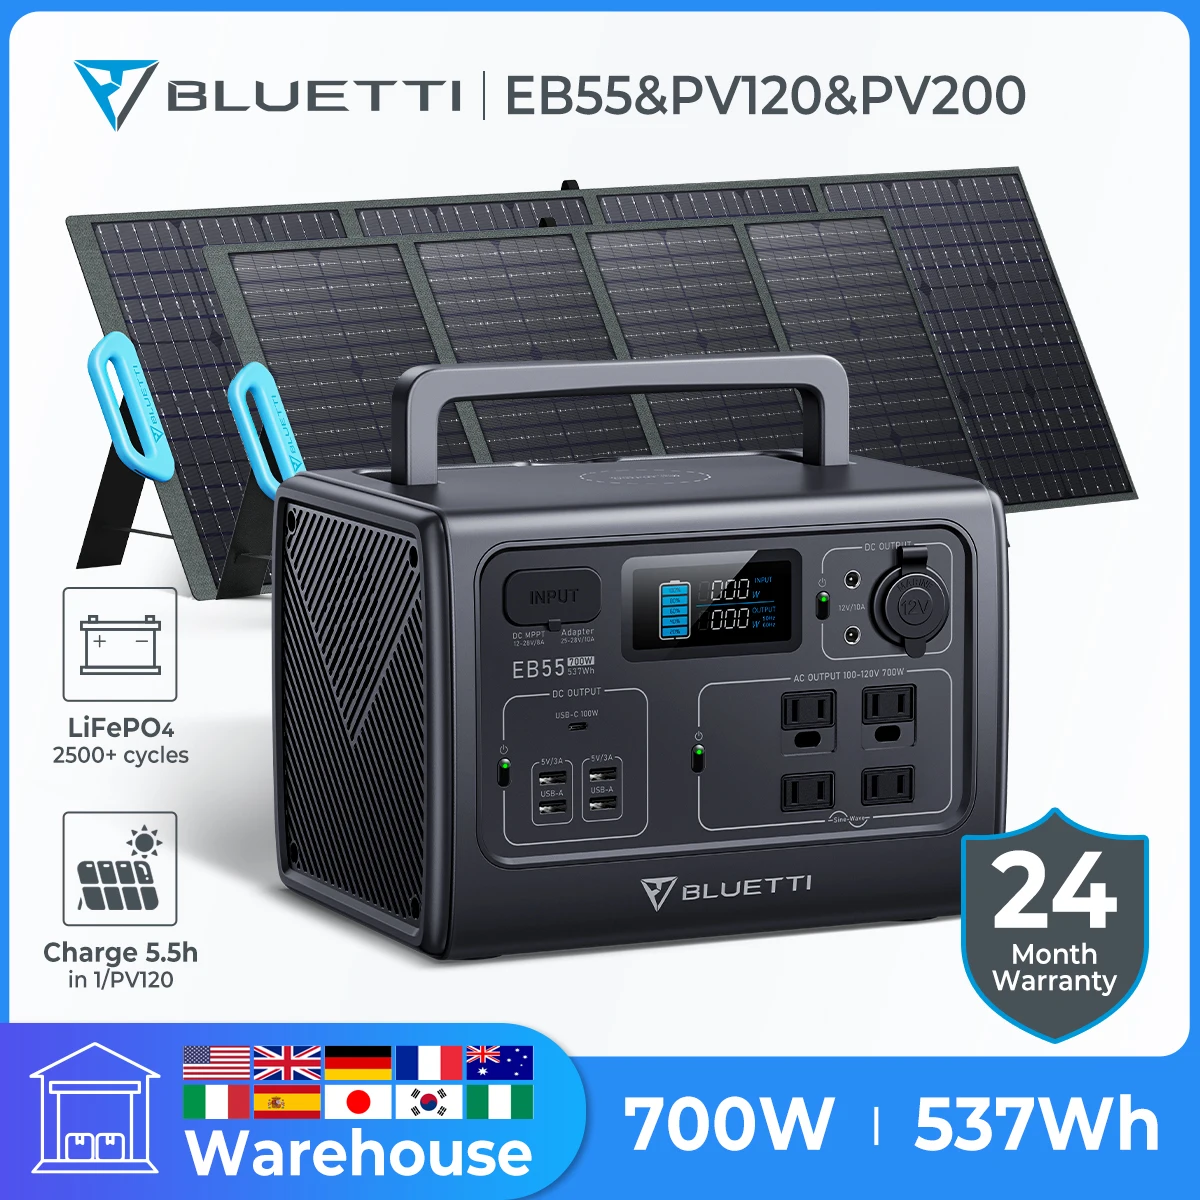 

BLUETTI EB55 Portable Power Station With Solar Panel 700W 537Wh Solar Station Generator LiFePo4 Battery Emergency Camping Supply